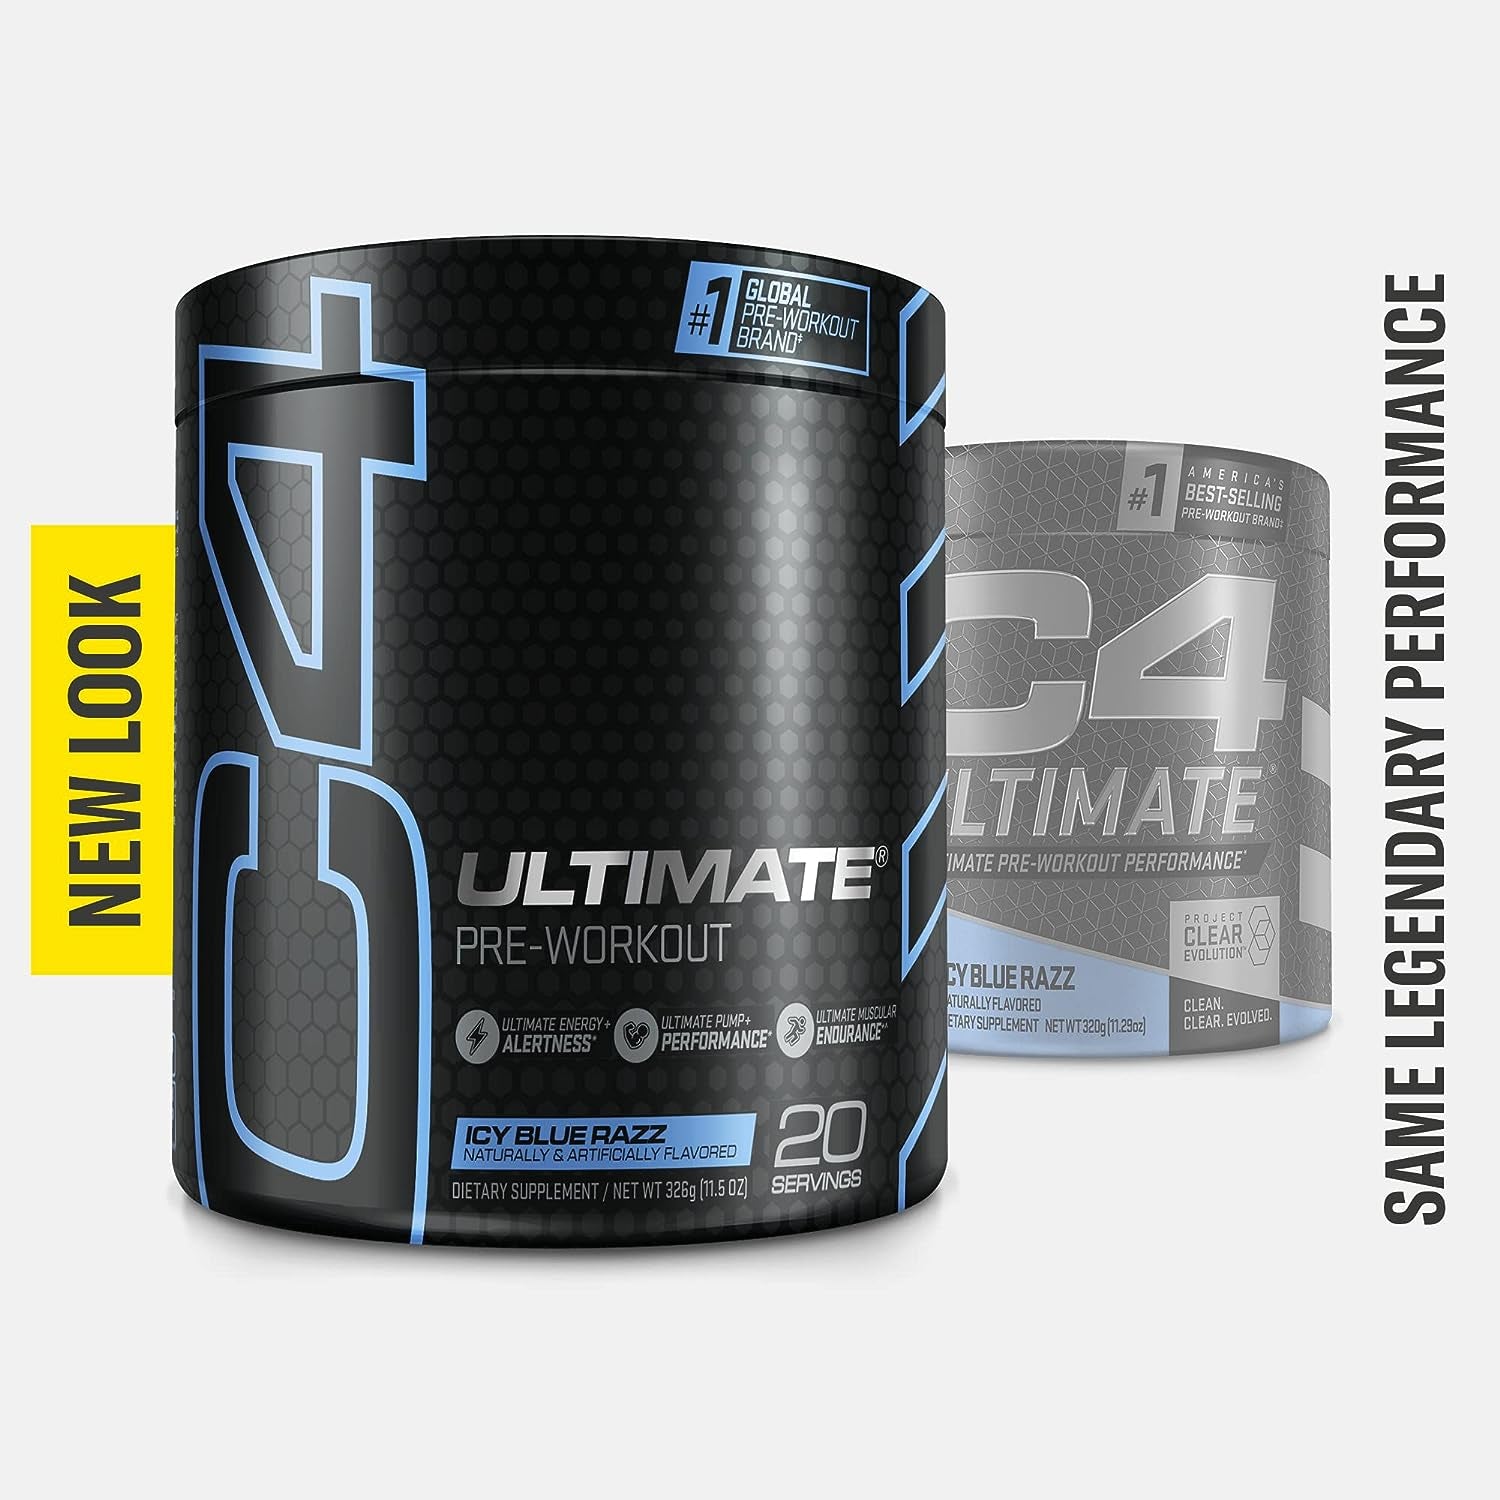 C4 Ultimate Pre Workout Powder ICY Blue Razz - Sugar Free Preworkout Energy Supplement for Men & Women - 300Mg Caffeine + 3.2G Beta Alanine + 2 Patented Creatines - 20 Servings